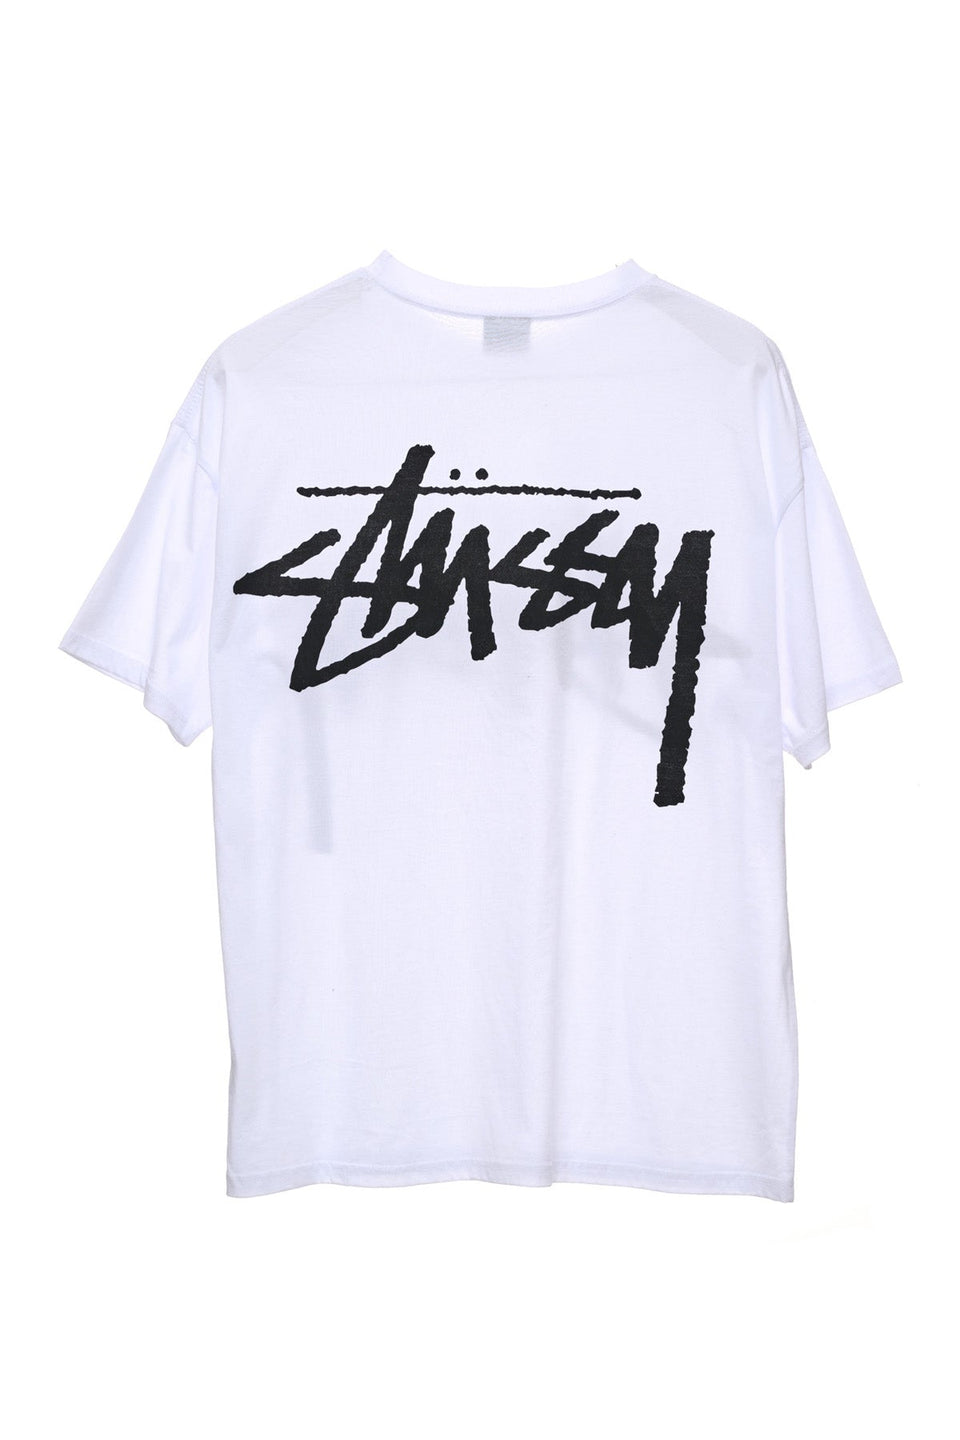 Stussy Bigger Stock Relaxed Tee - White